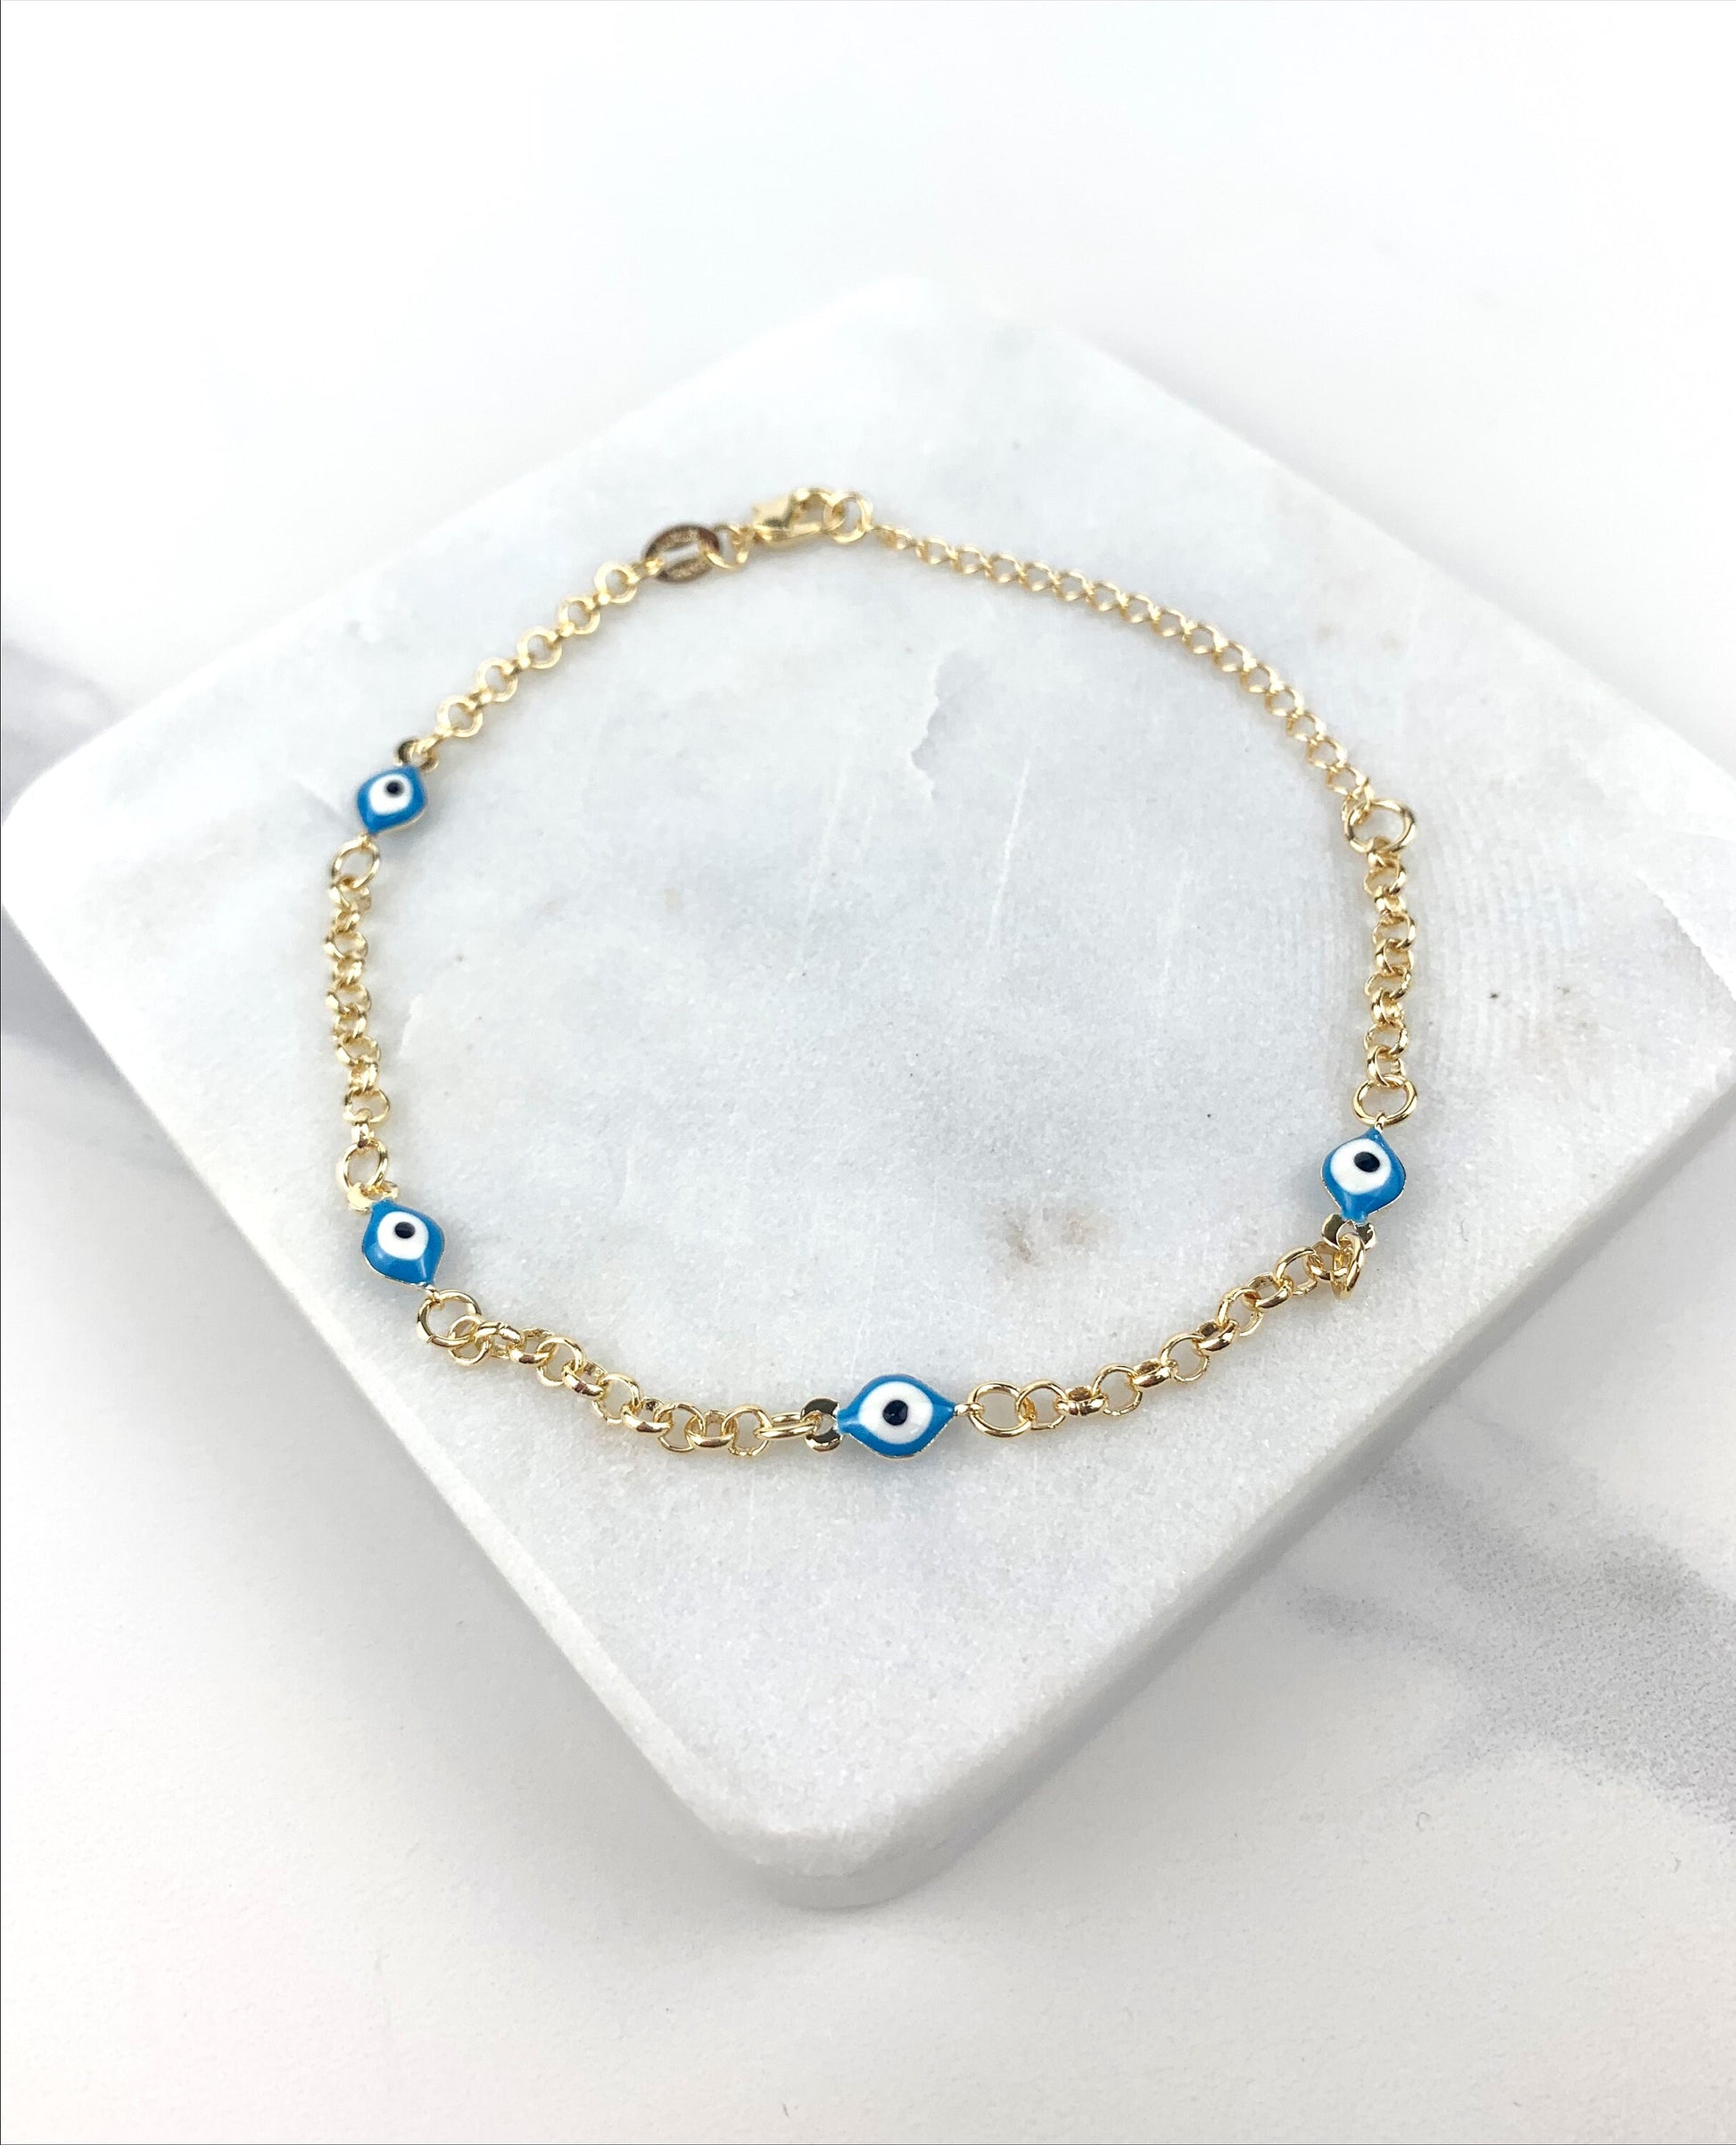 18k Gold Filled Curb Link Chain with Evil Eye Charms Red or Blue, Linked Lucky & Protection Bracelet Wholesale Jewelry Making Supplies